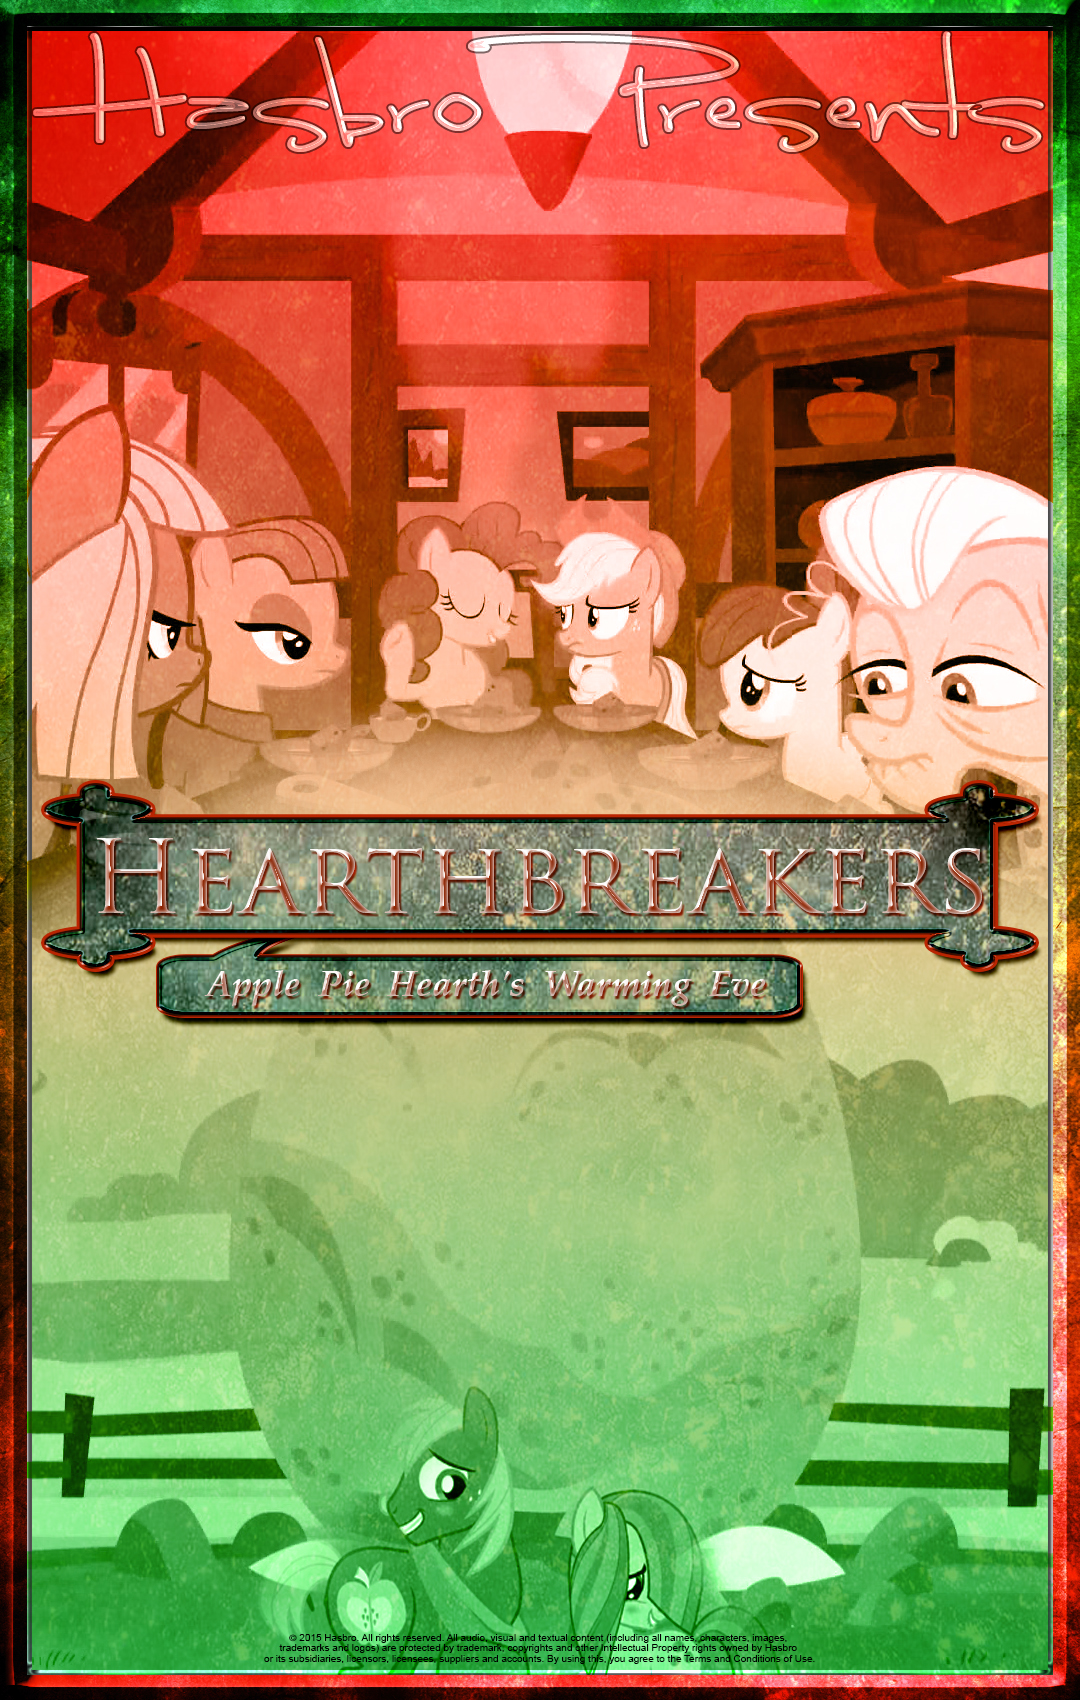 mlp___hearthbreakers___movie_poster_by_pims1978-d9ebe64.jpg